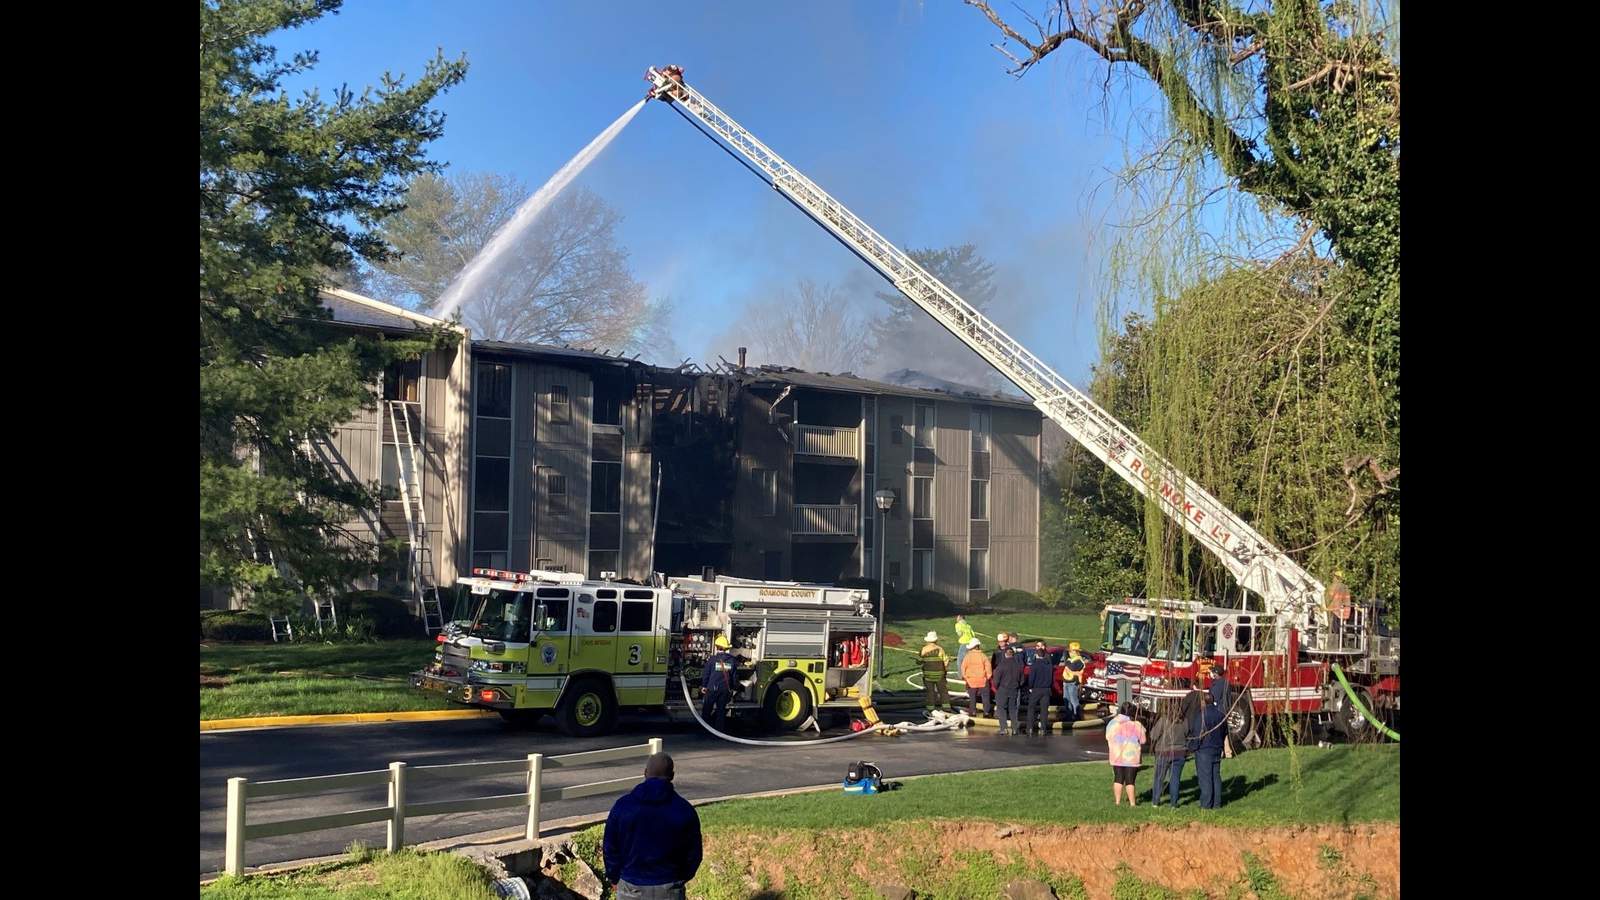 12 units displaced after Pebble Creek Apartments fire in Roanoke County